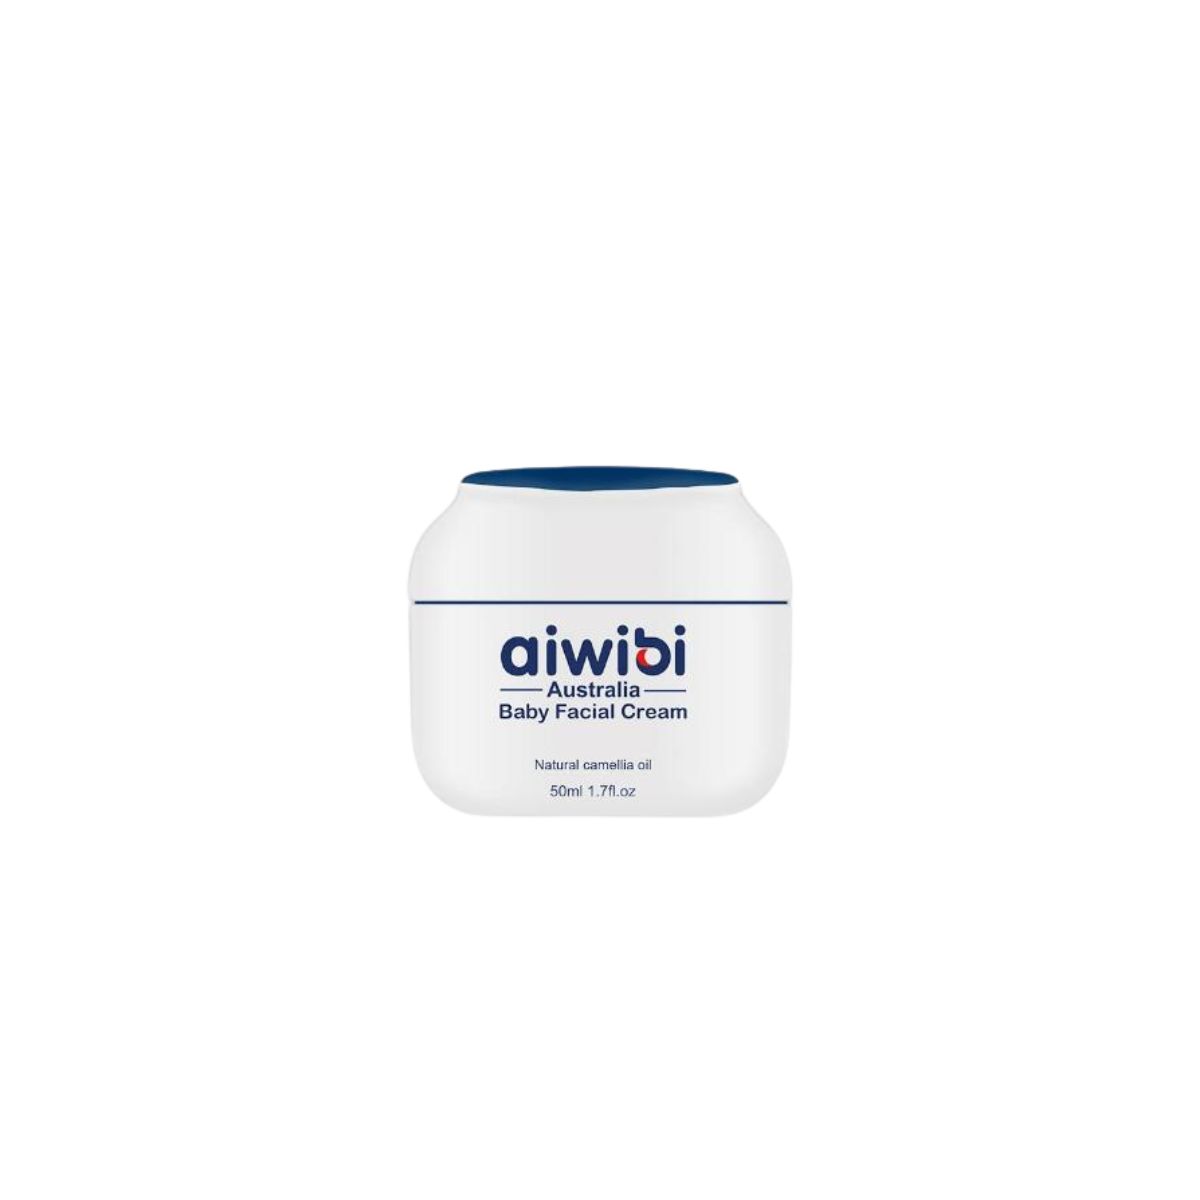 Aiwibi Baby Facial Cream - Nourishing And Repairing - Delicate Care For Your Baby - 50ml